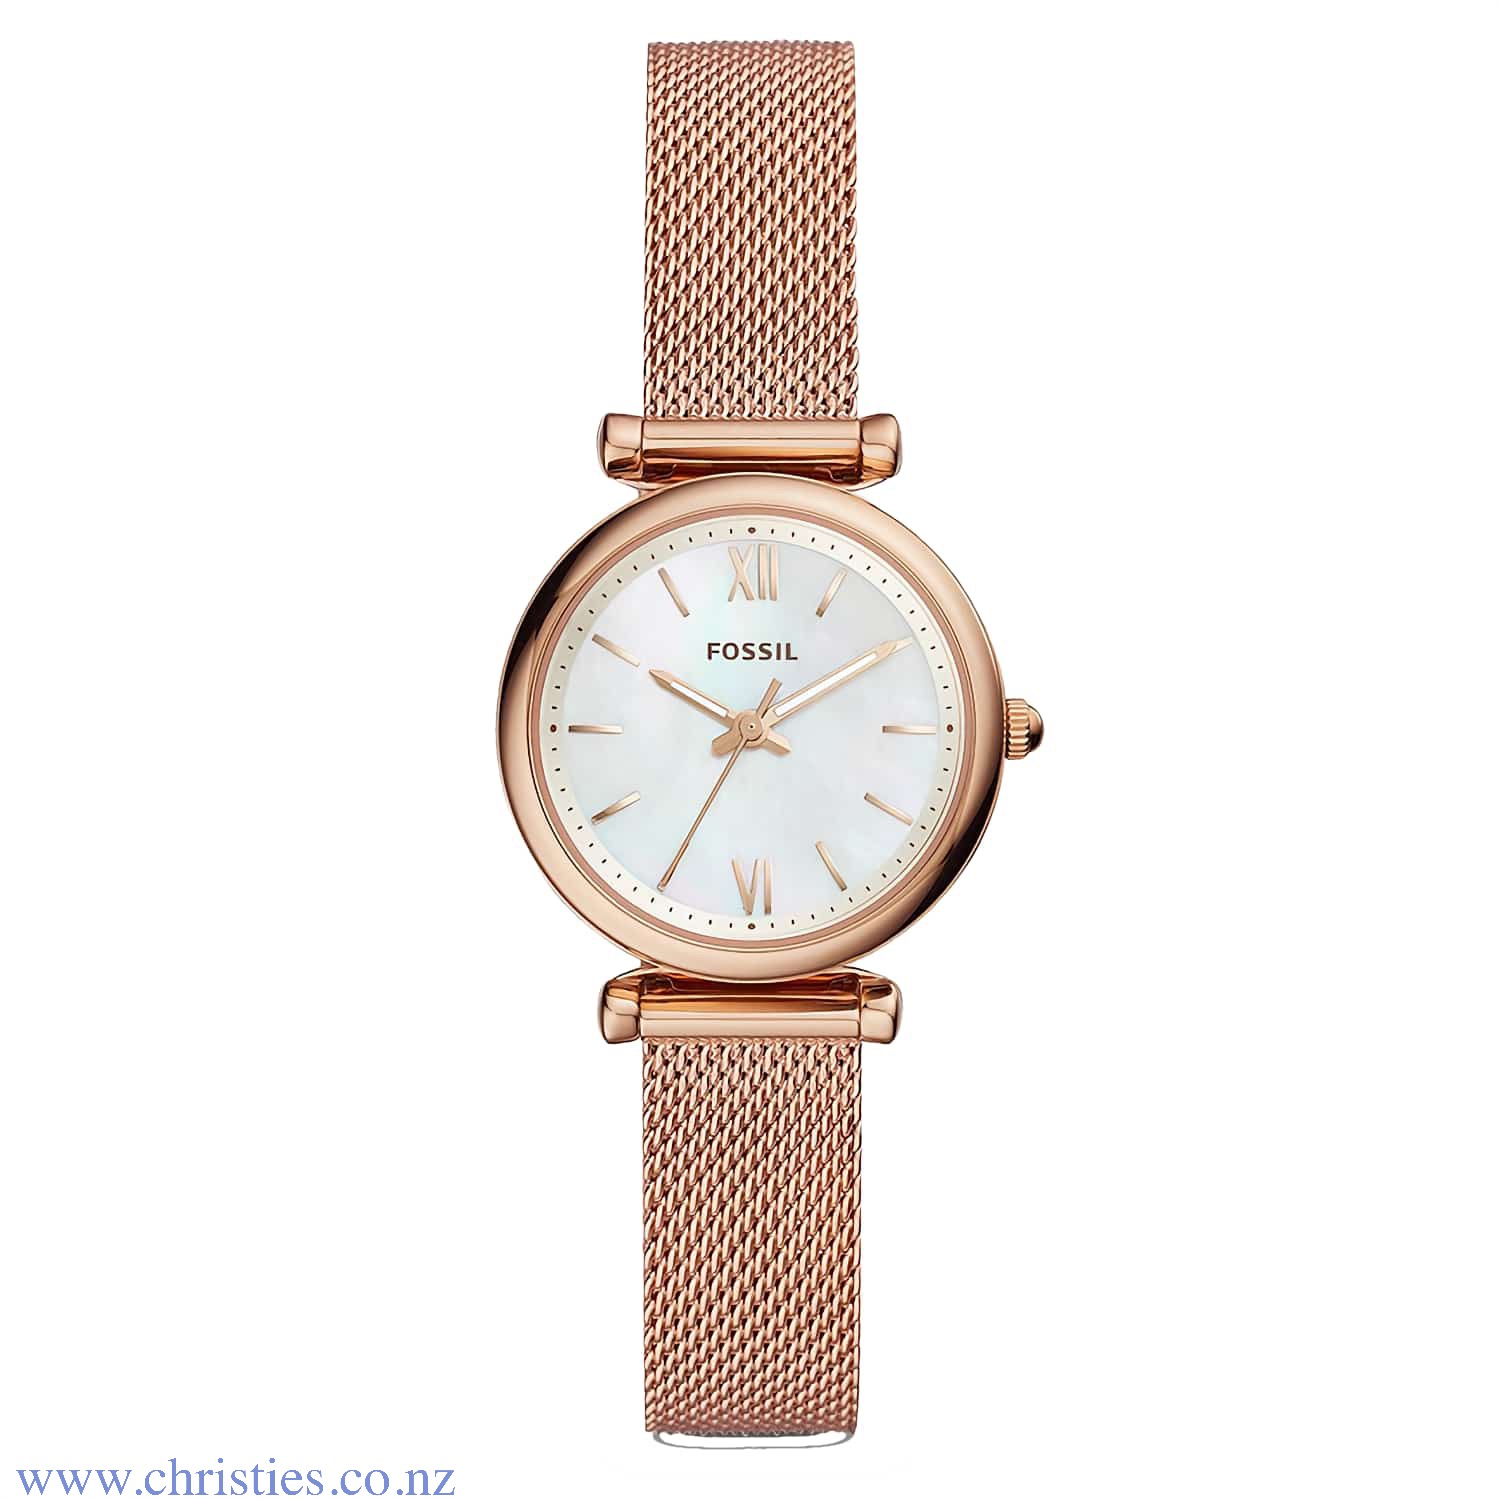 ES4433 Fossil Carlie Mini Rose Mother of Pearl Watch. ES4433 Fossil Carlie Mini Rose Mother of Pearl Watch with 50 Metre Water Resist Rating Afterpay - Split your purchase into 4 instalments - Pay for your purchase over 4 instalments, due every two weeks.